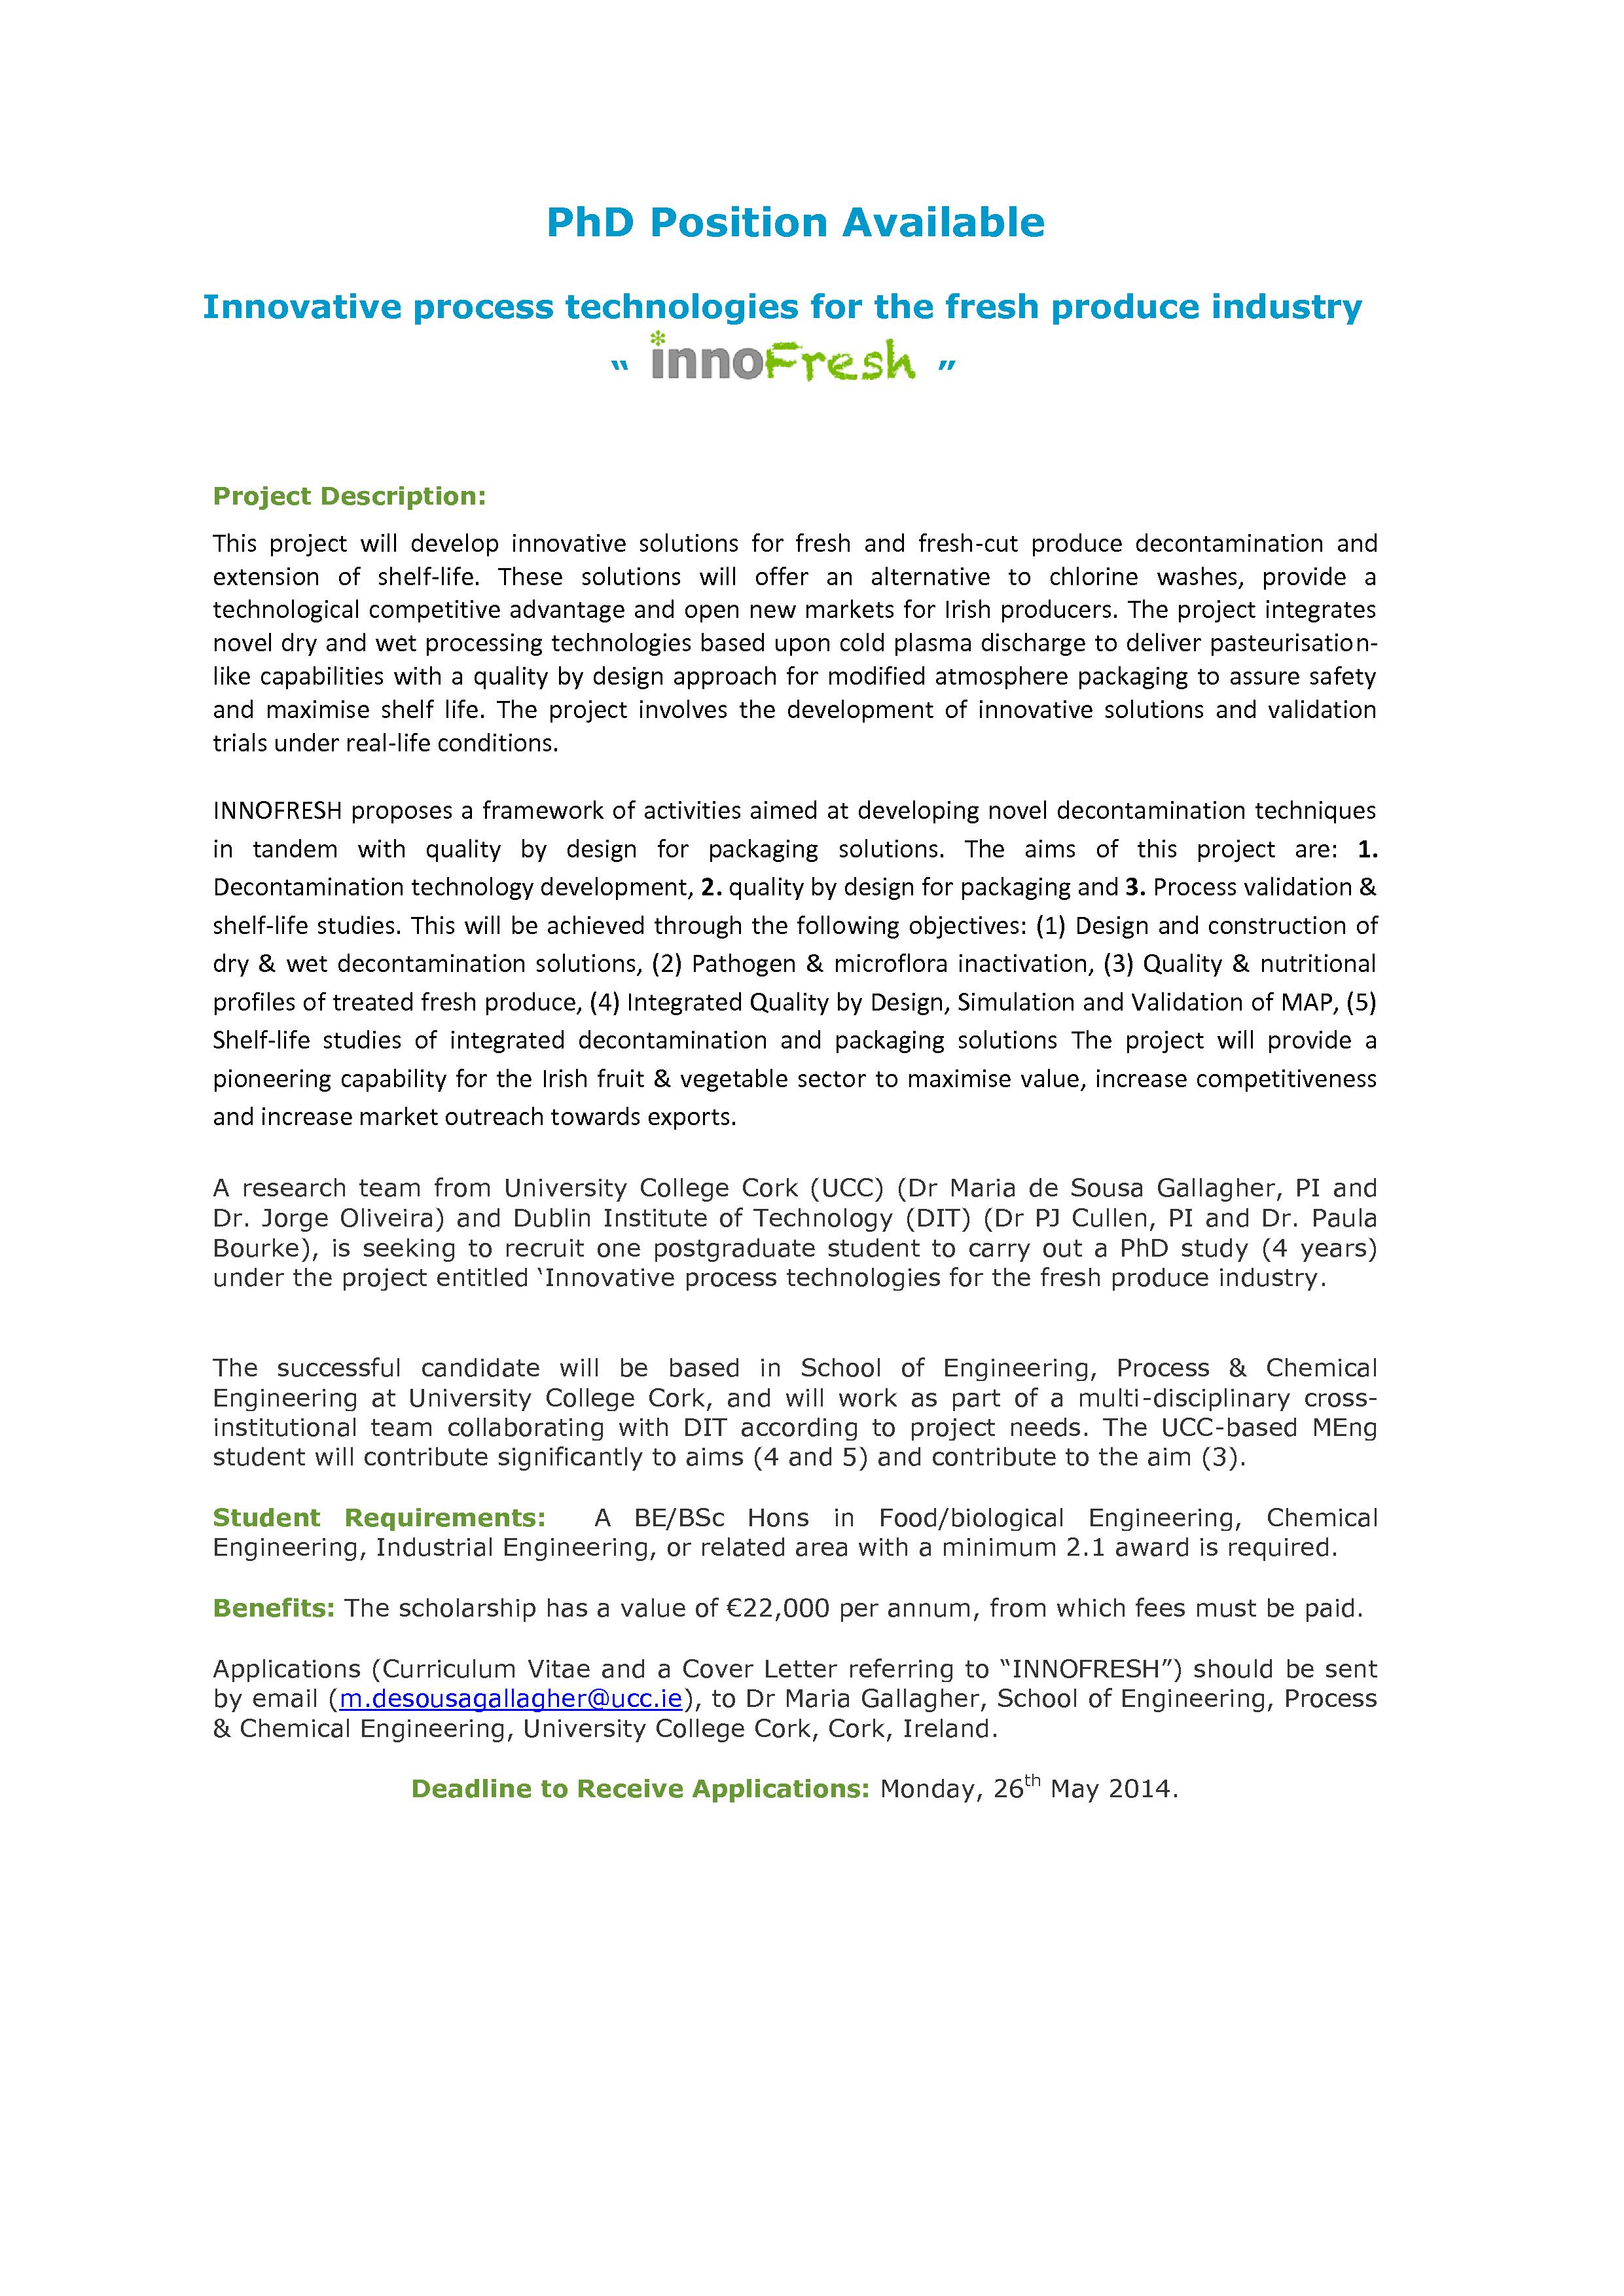 FUNDED PhD Position Available - apply now!